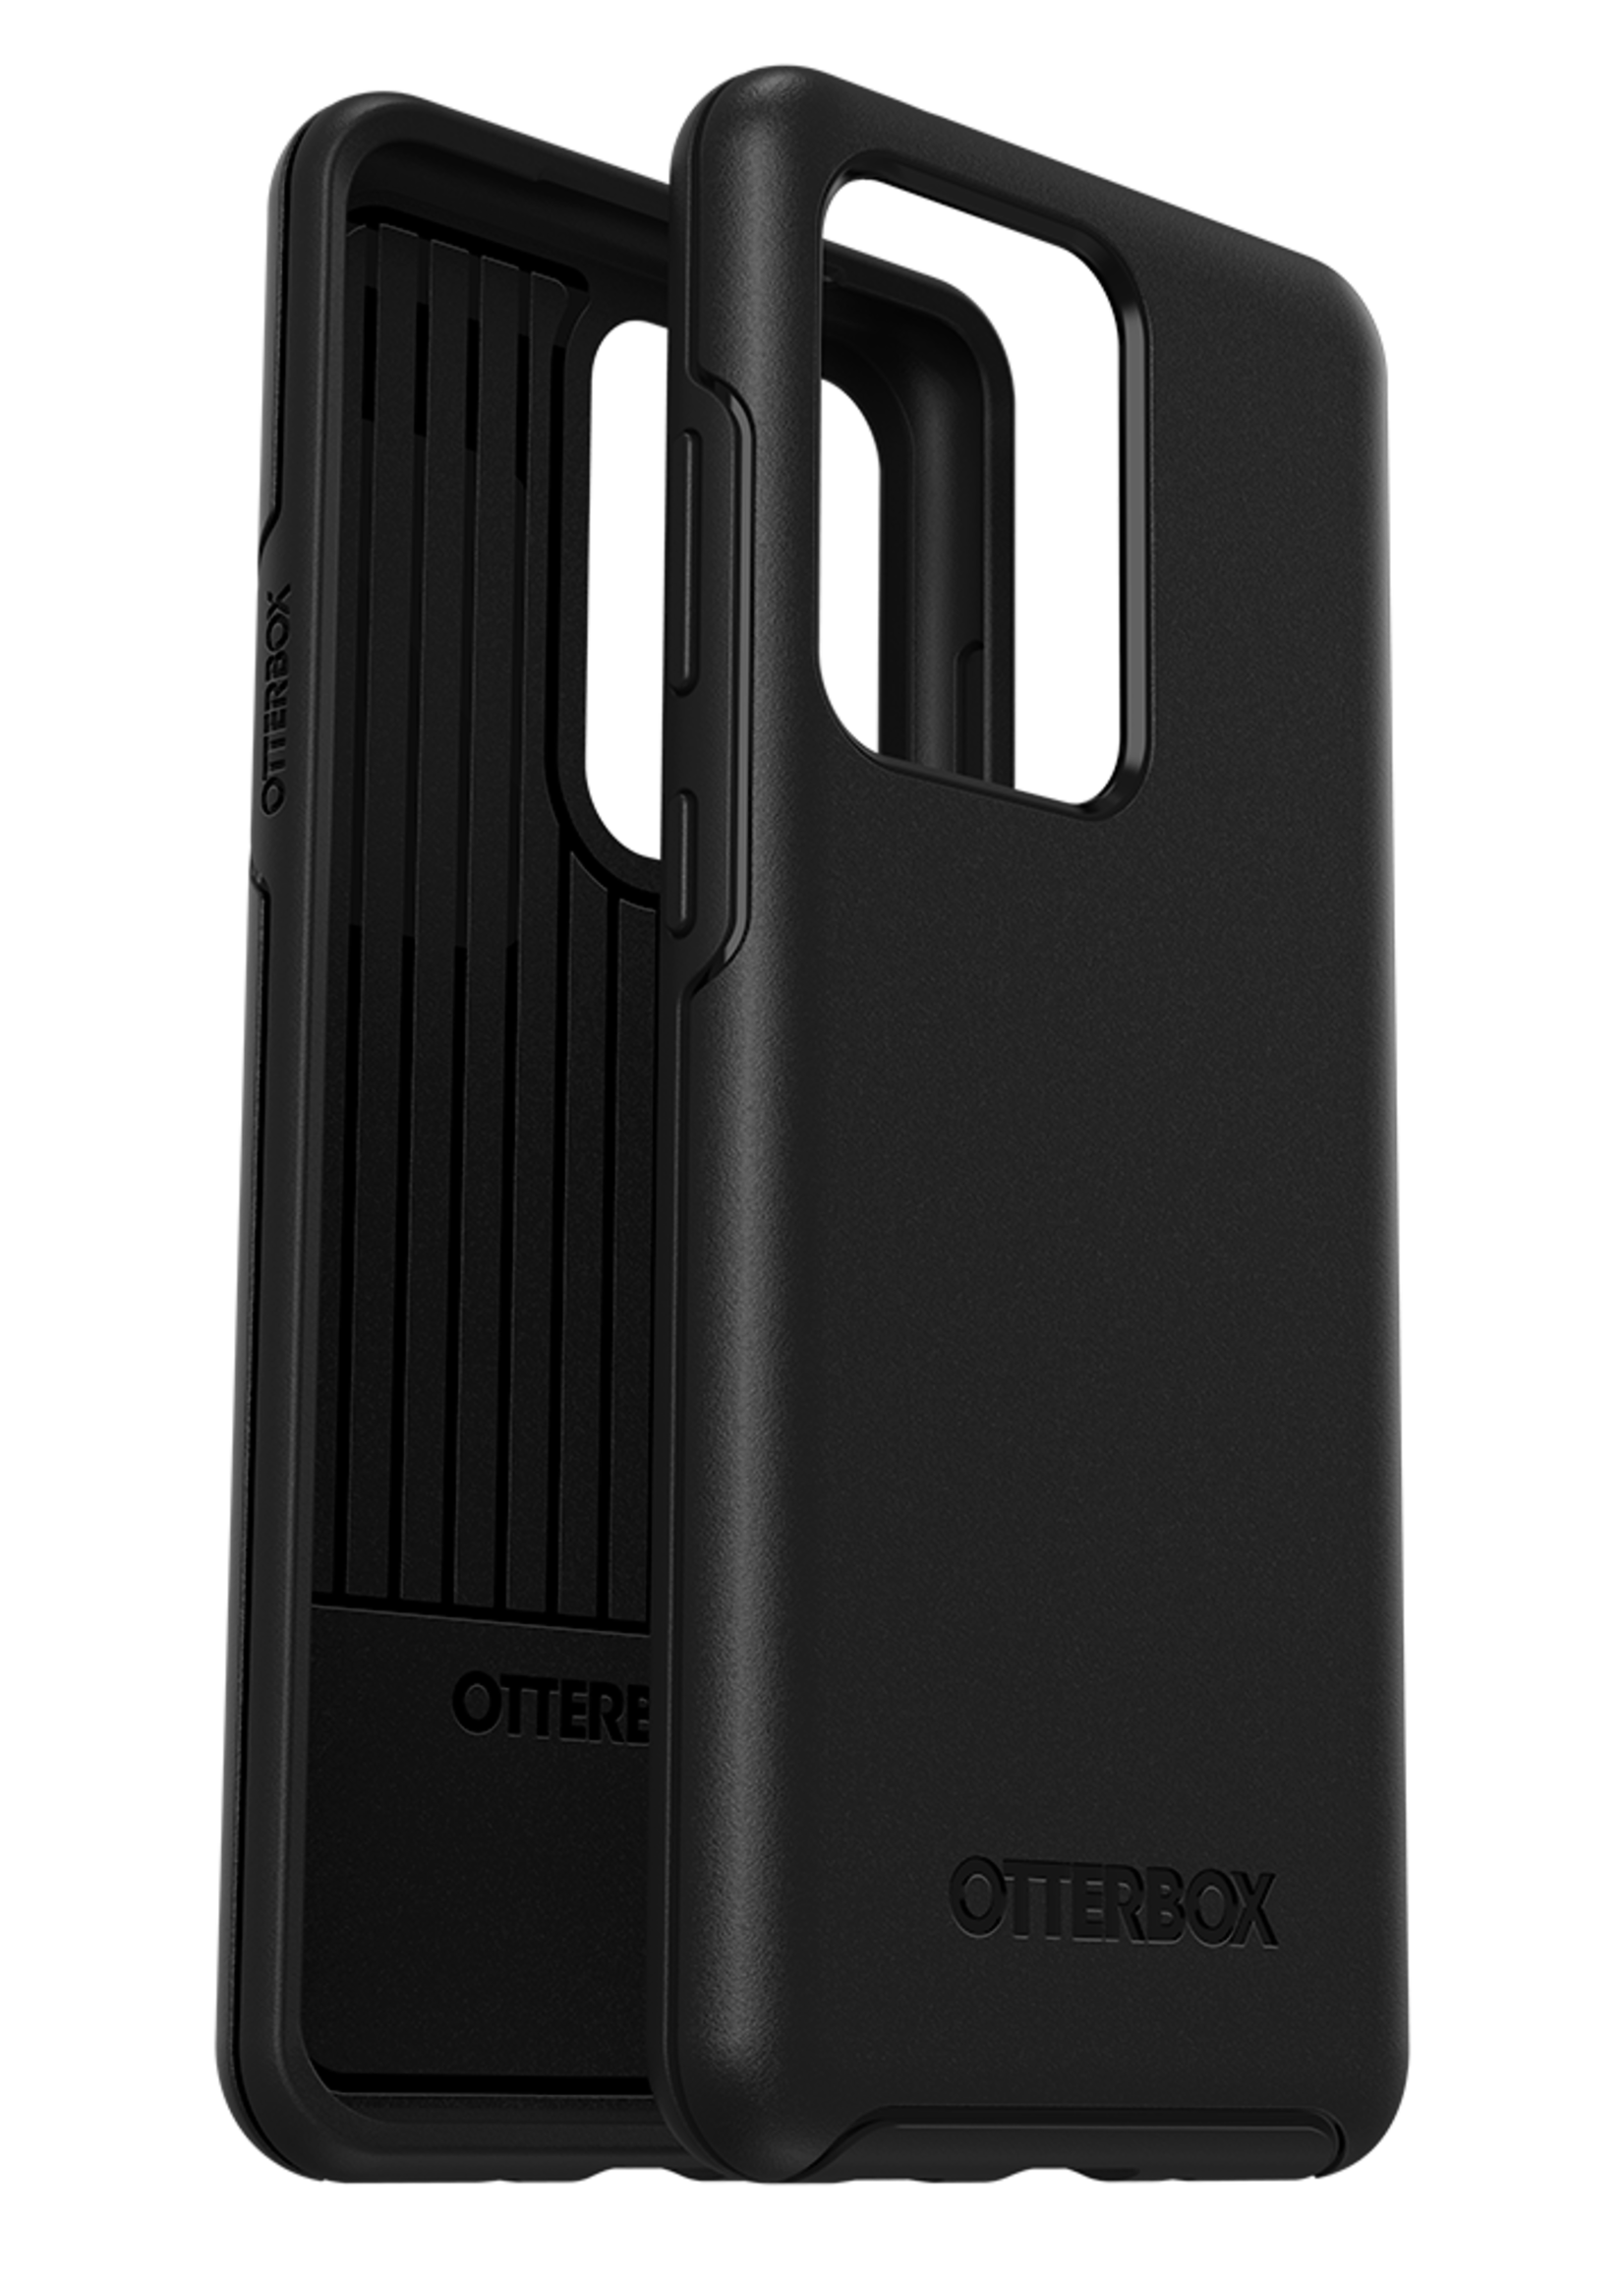 Otterbox OtterBox - Symmetry Case for Samsung Galaxy S20 Ultra - Black